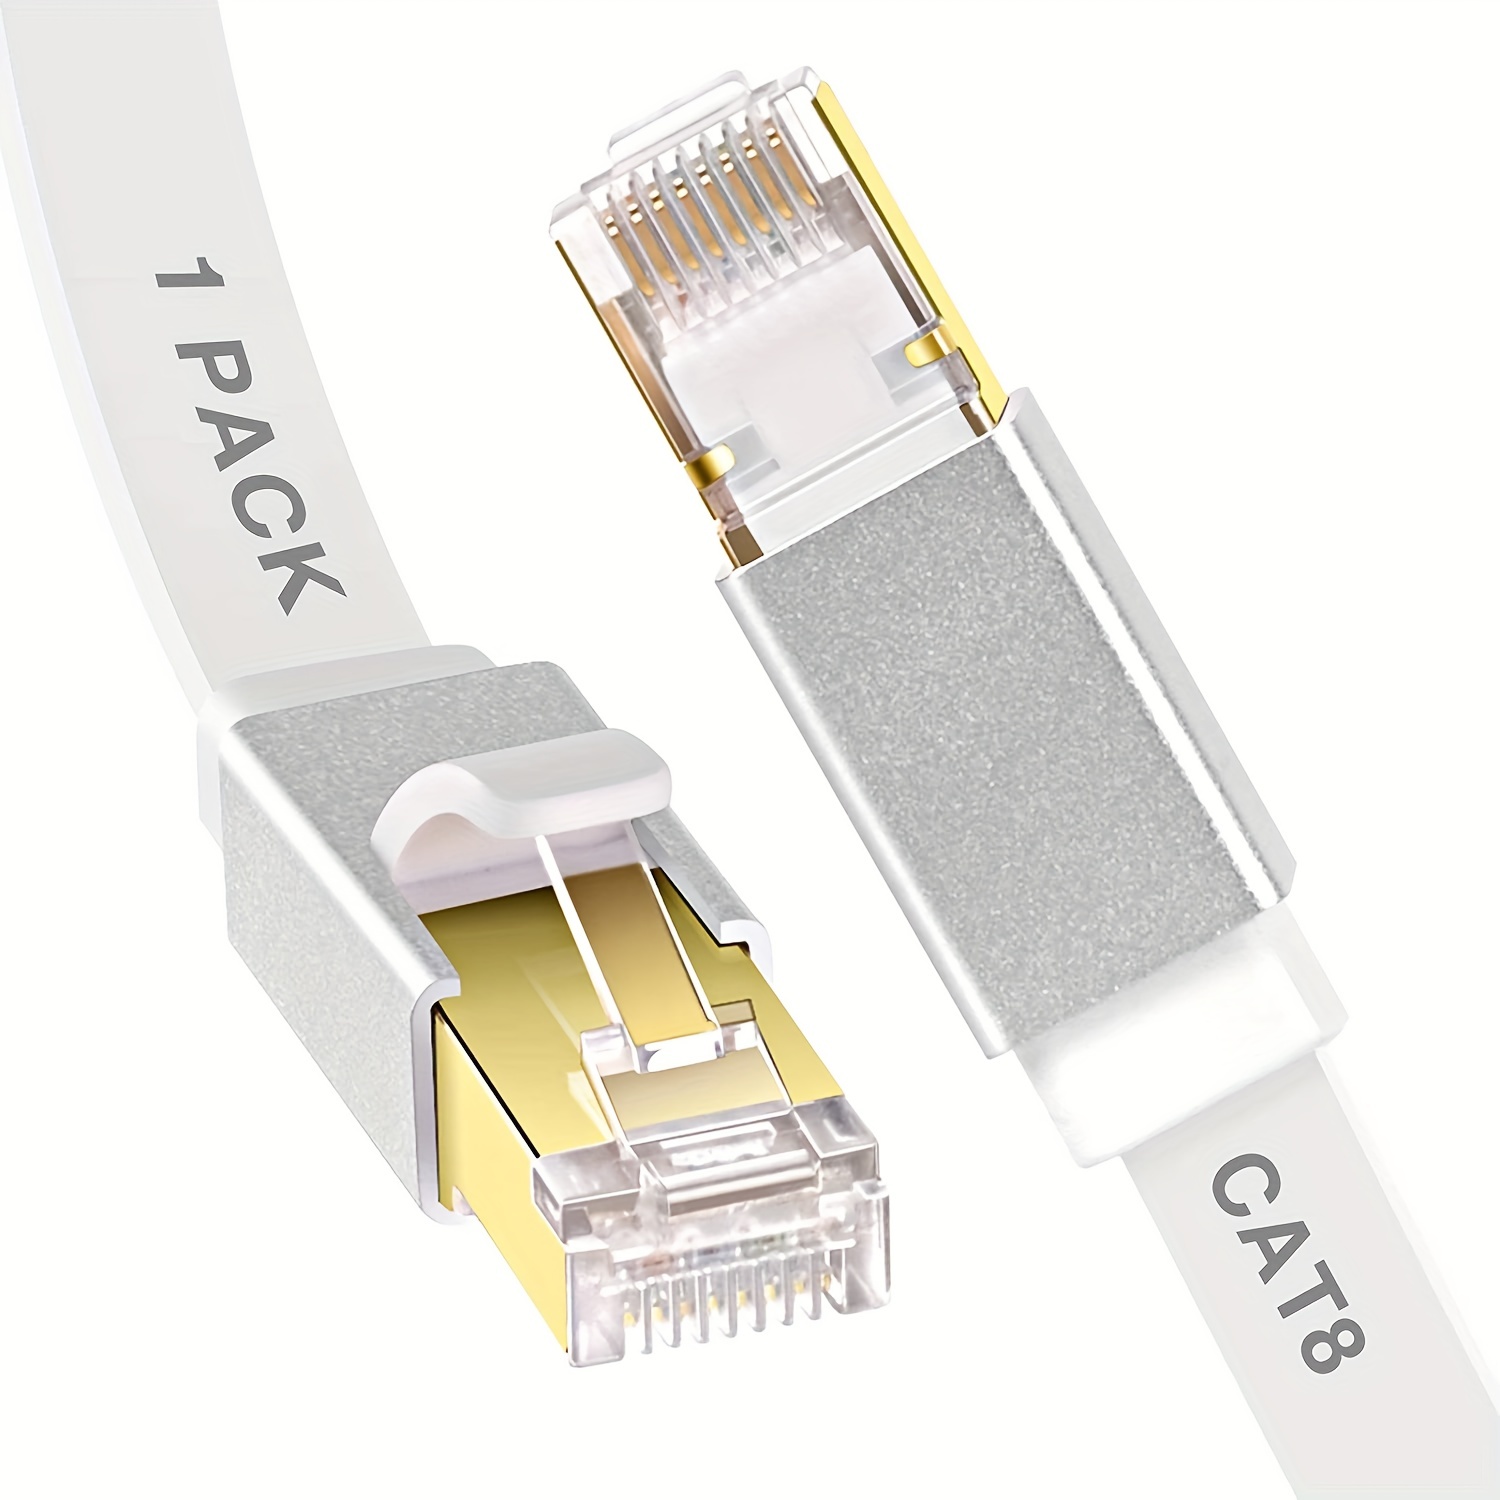 Flat Cat.8 Patch Cable